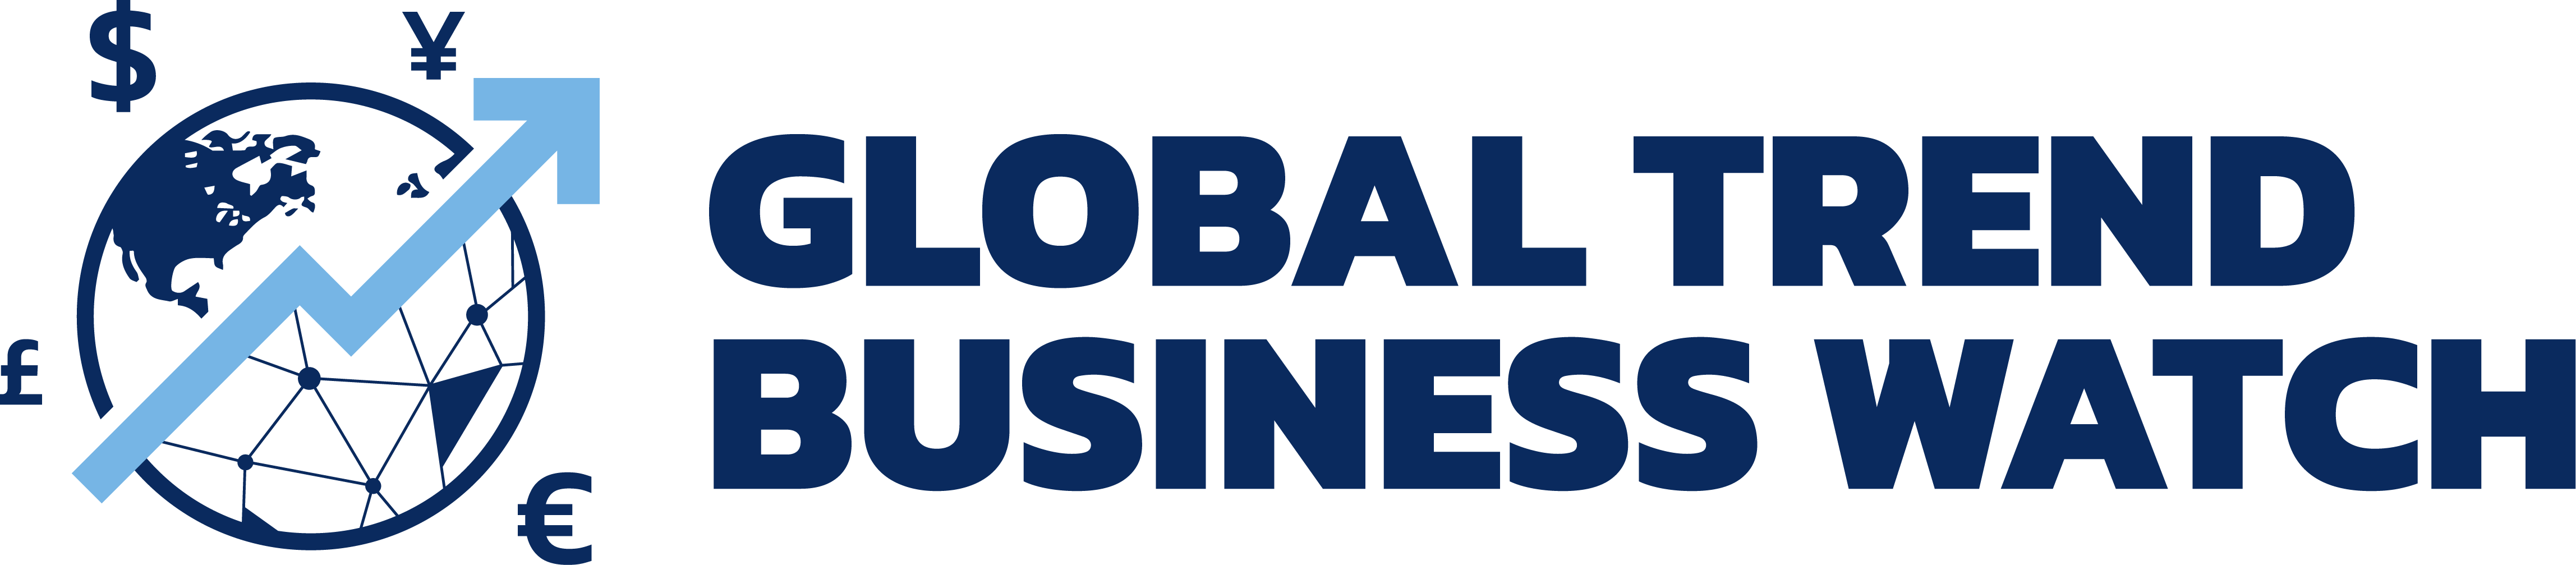 Global Trend Business Watch